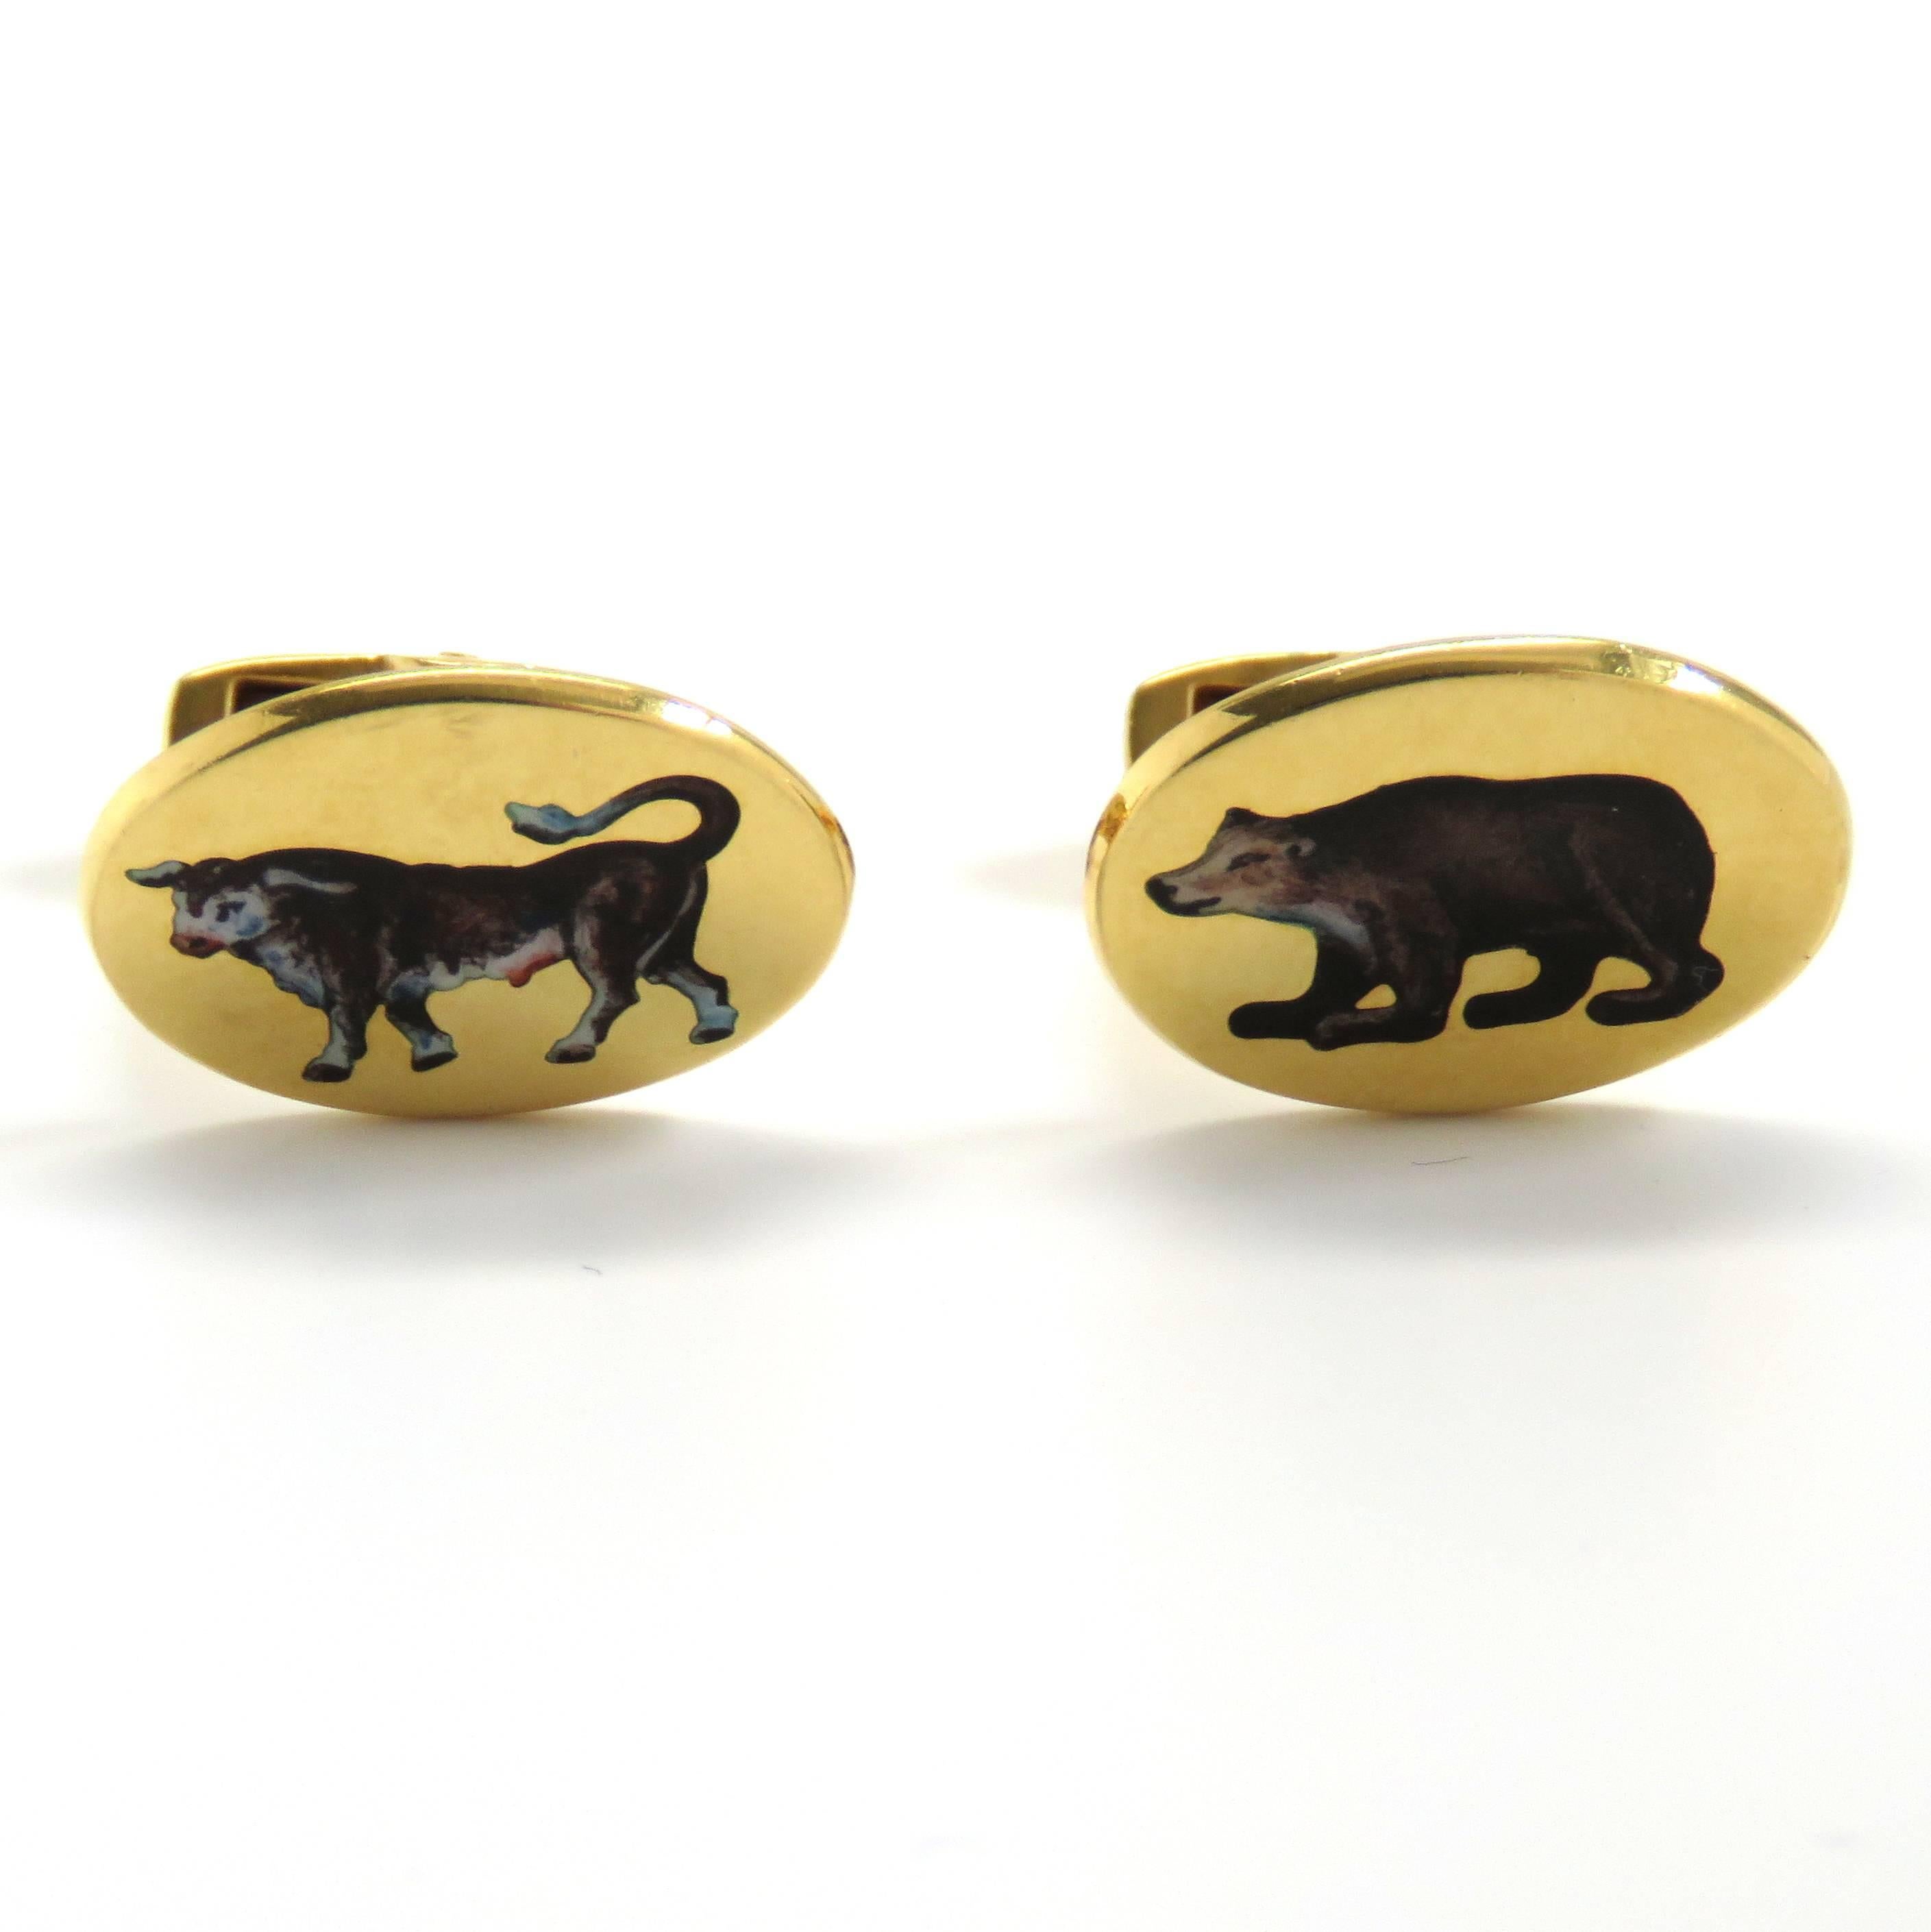 A pair of 18k yellow gold cufflinks depicting a bull and bear, representing the financial markets.  The cufflinks measure 18mm x 14mm and weigh 15.2 grams.  Marked: D&F, England, English Gold Marks.